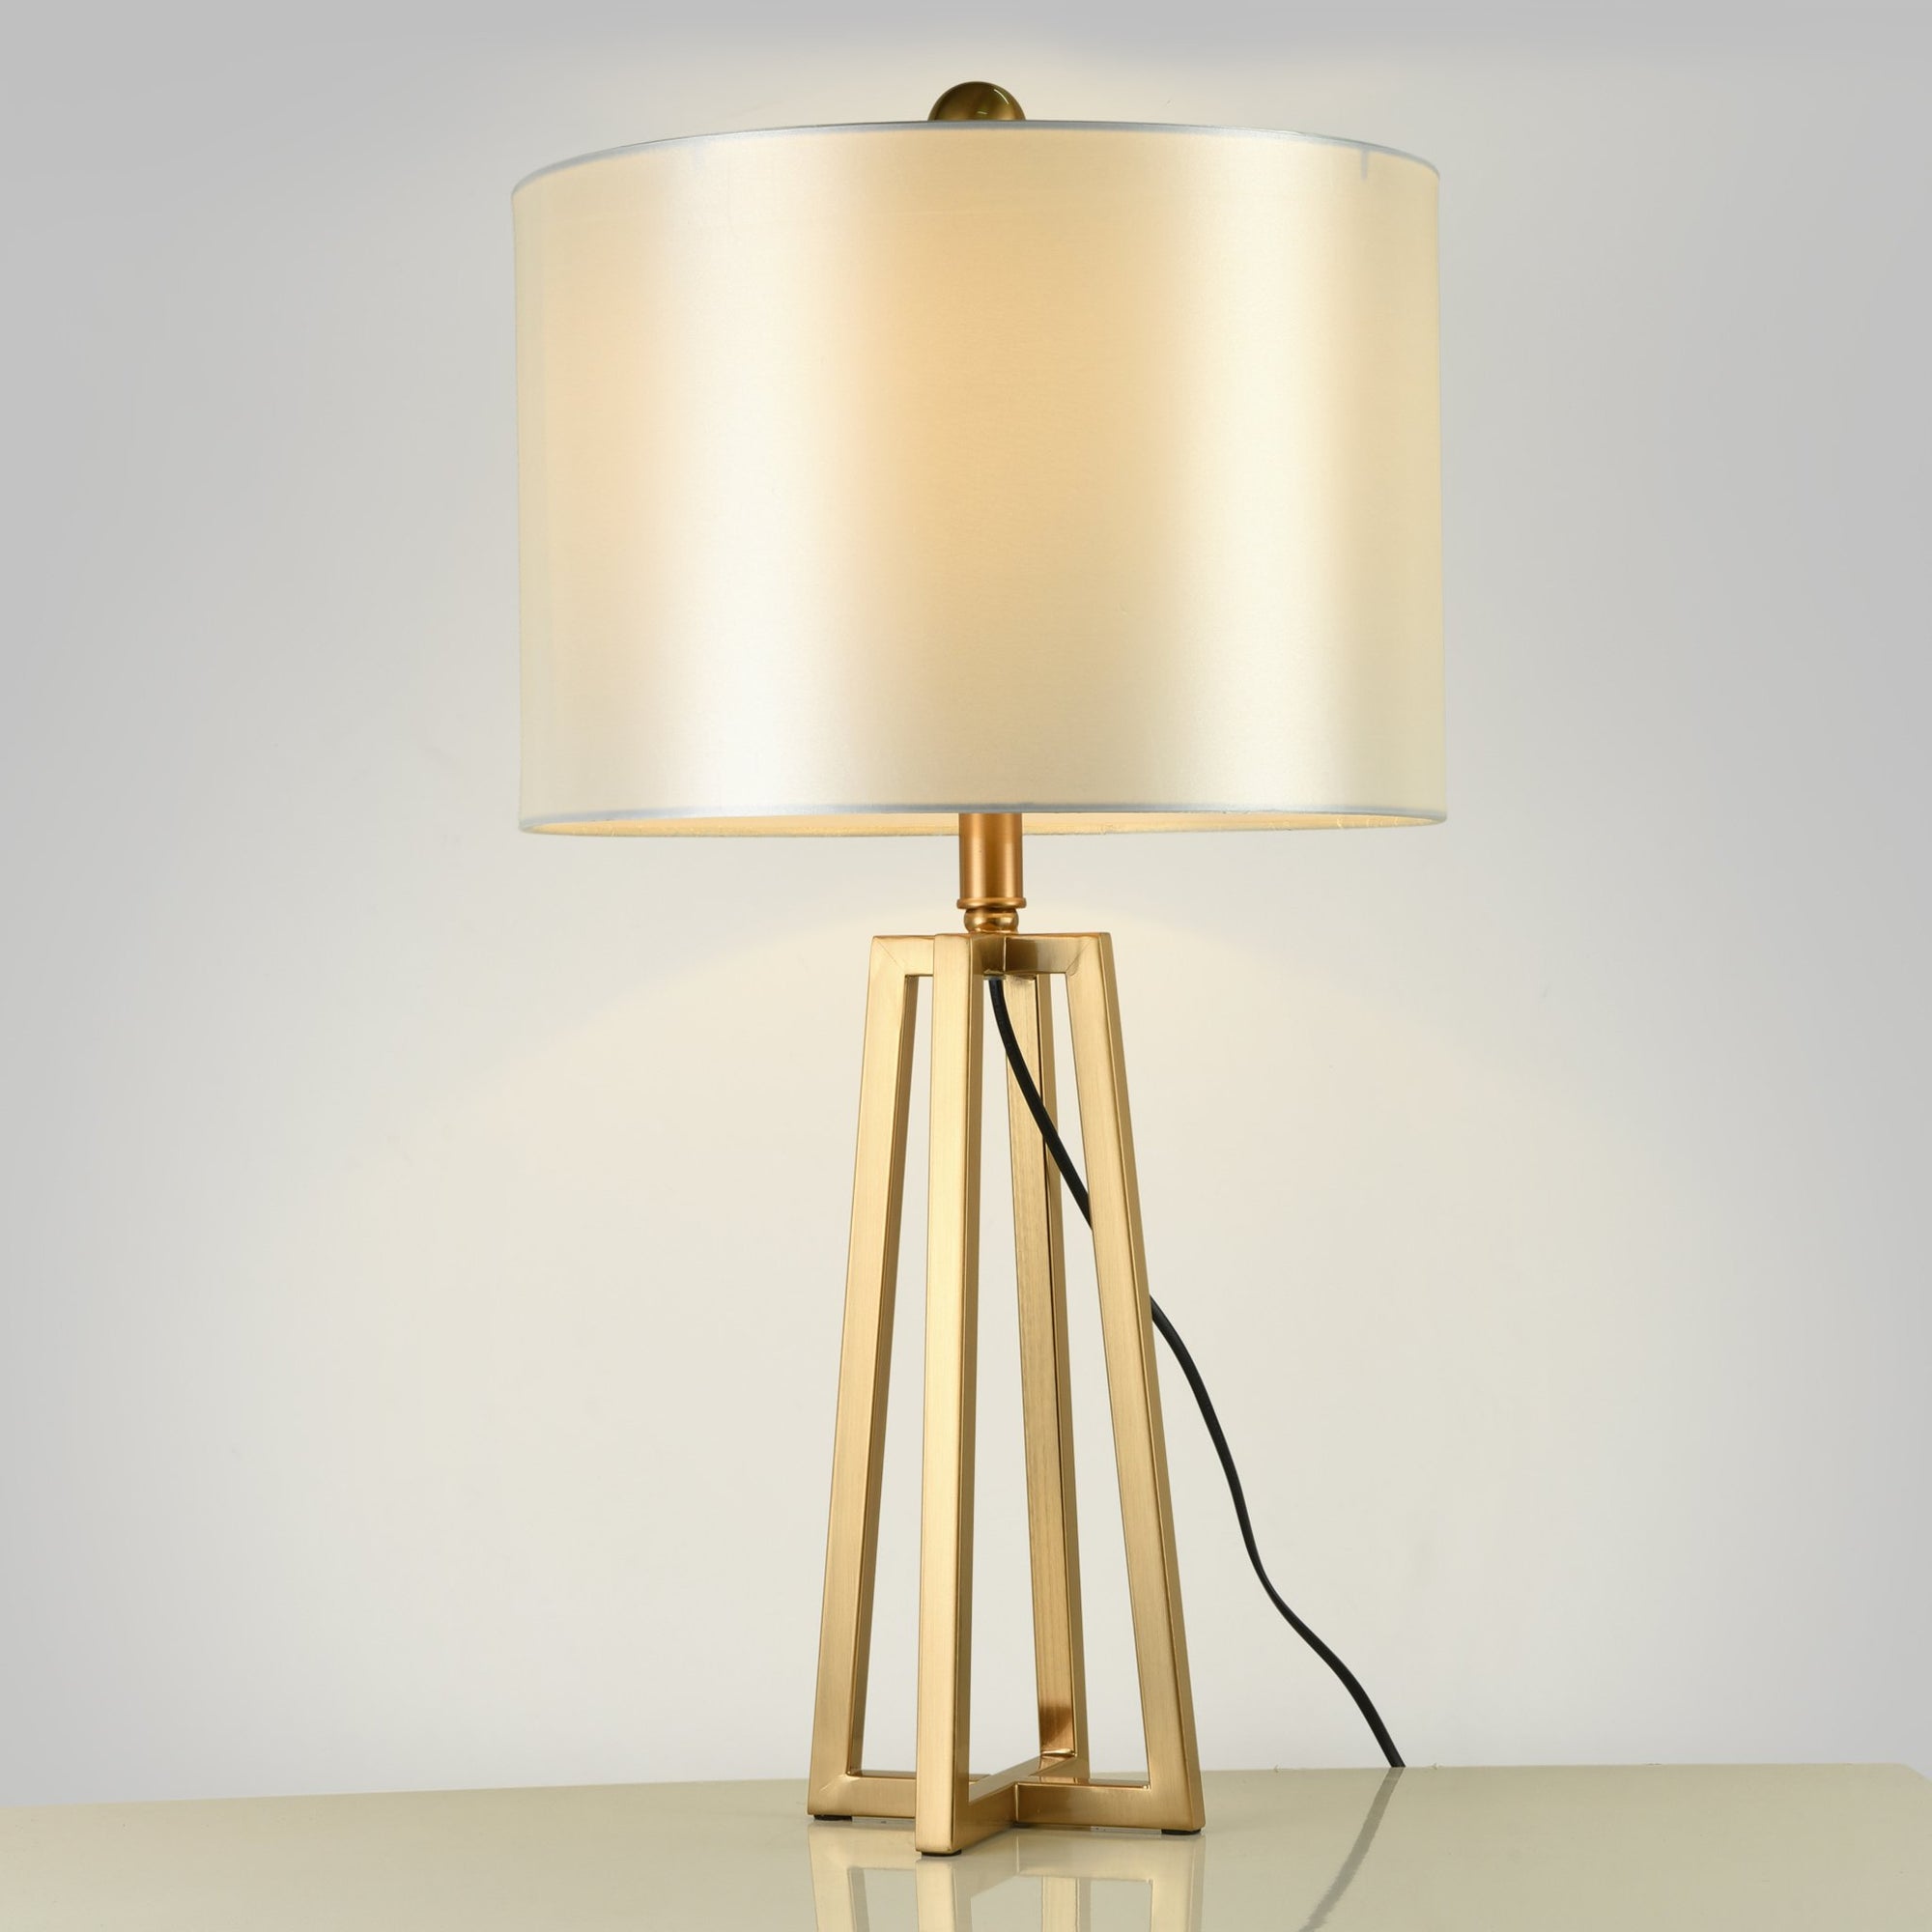 Buy Fab Table Lamp Online